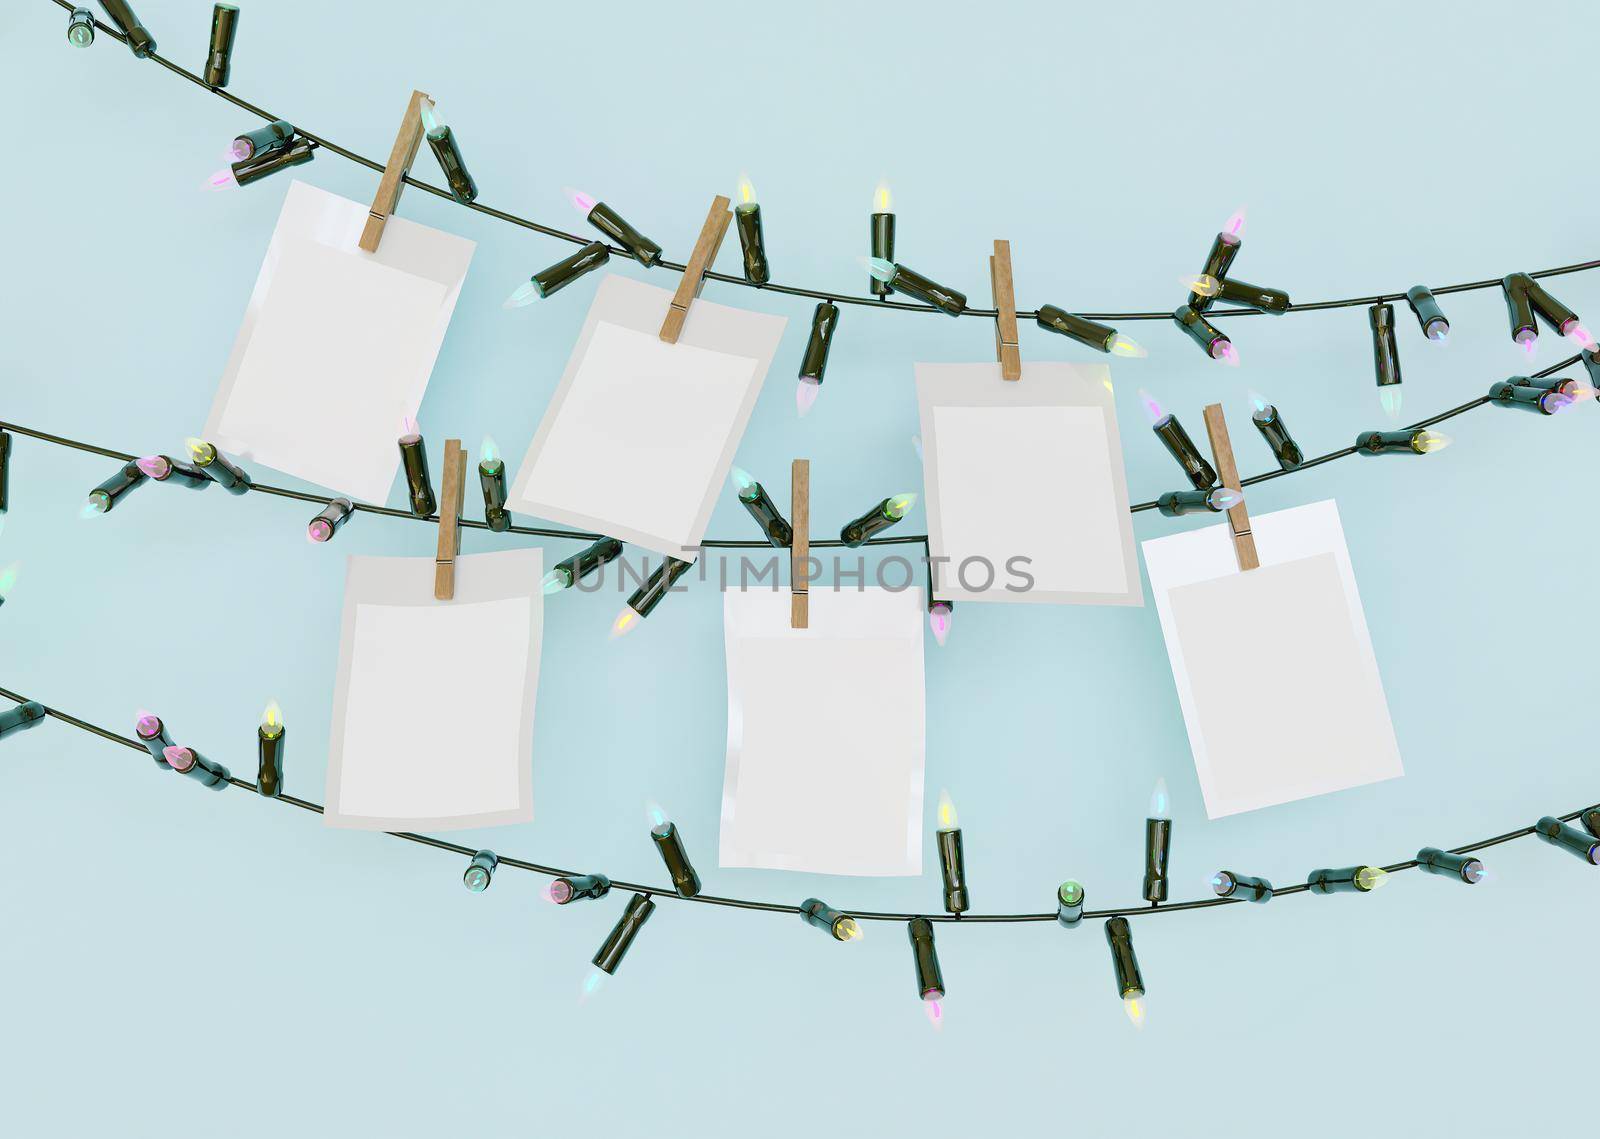 Christmas lights illuminated with mockup of slides hung with clips by asolano